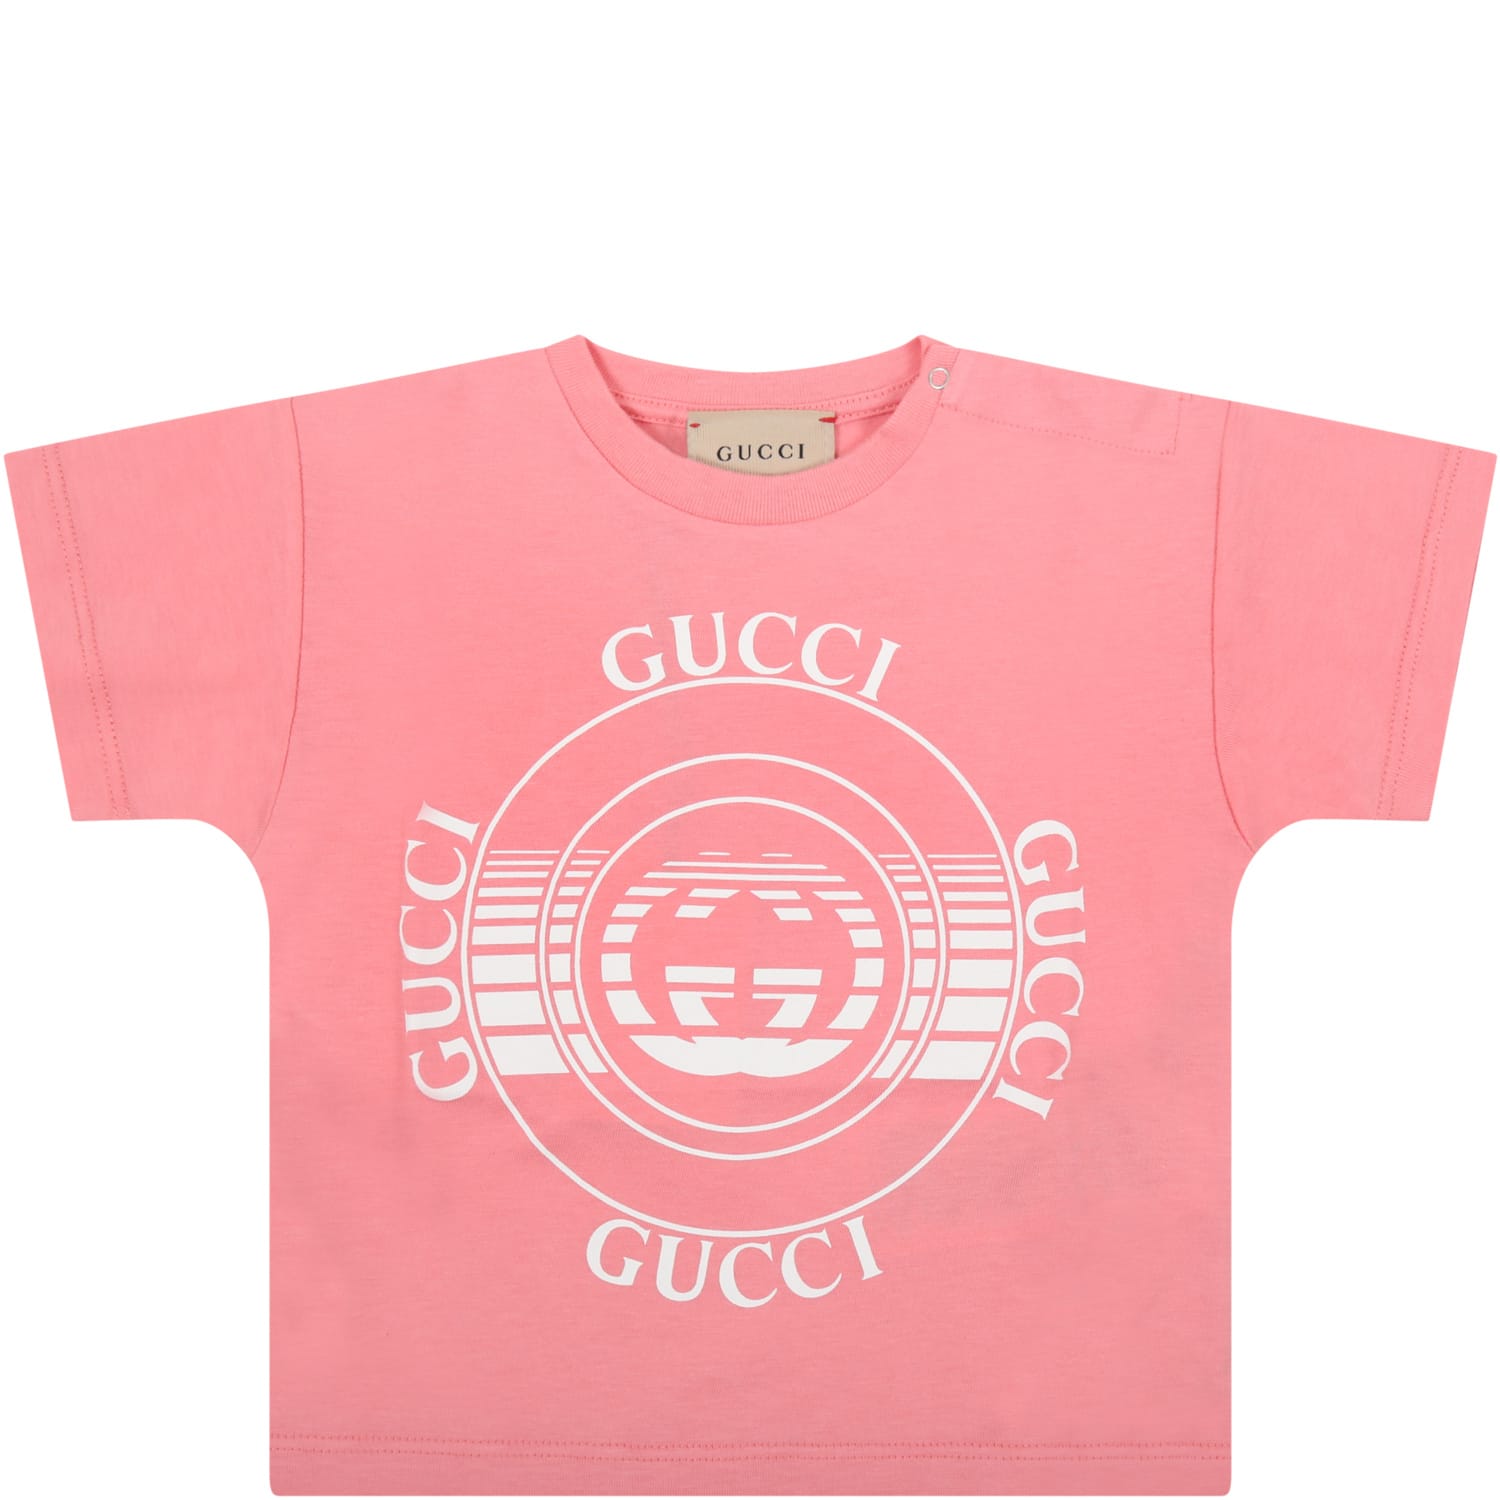 GUCCI PINK T-SHIRT FOR BABYGIRL WITH LOGOS,11824784